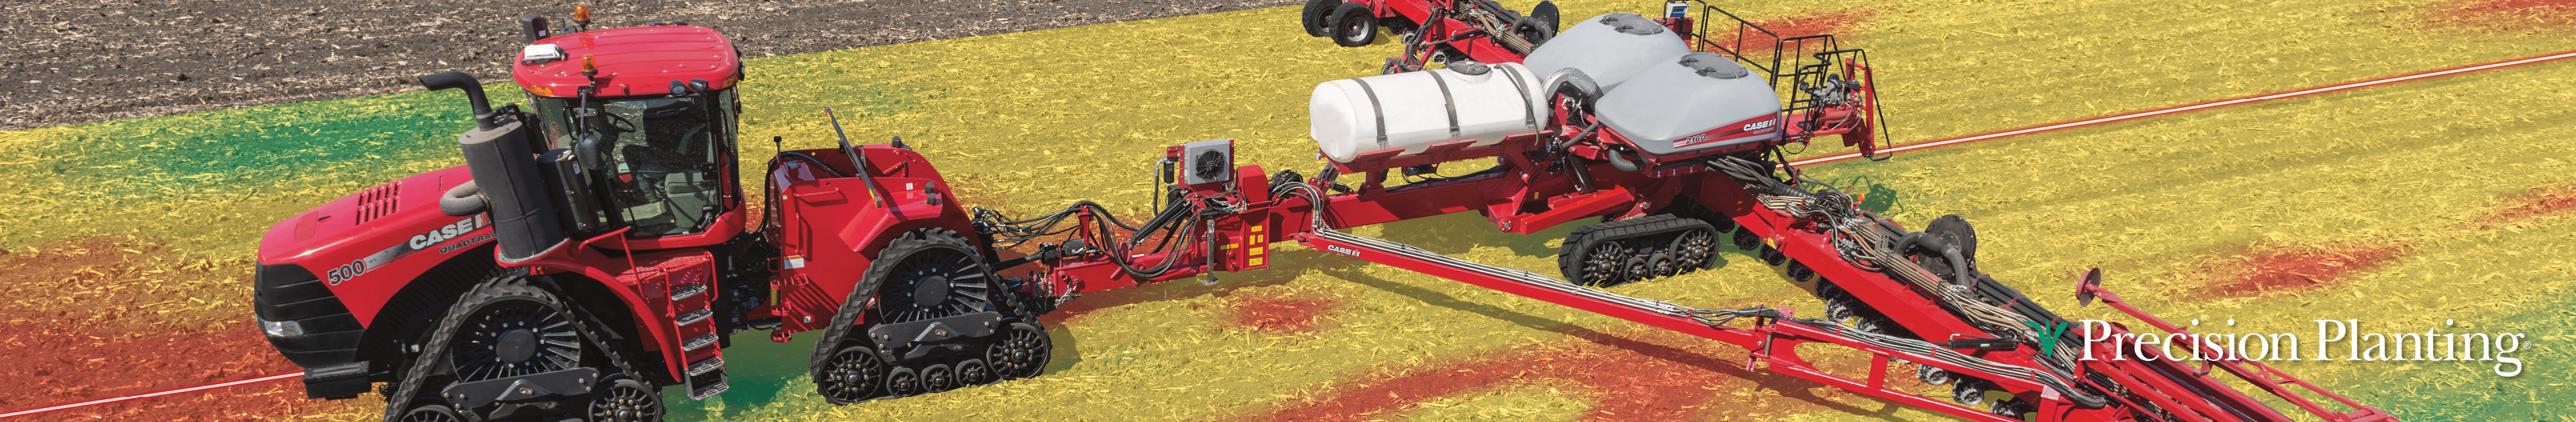 Case IH tractors with planters in field using Precision Planting technology